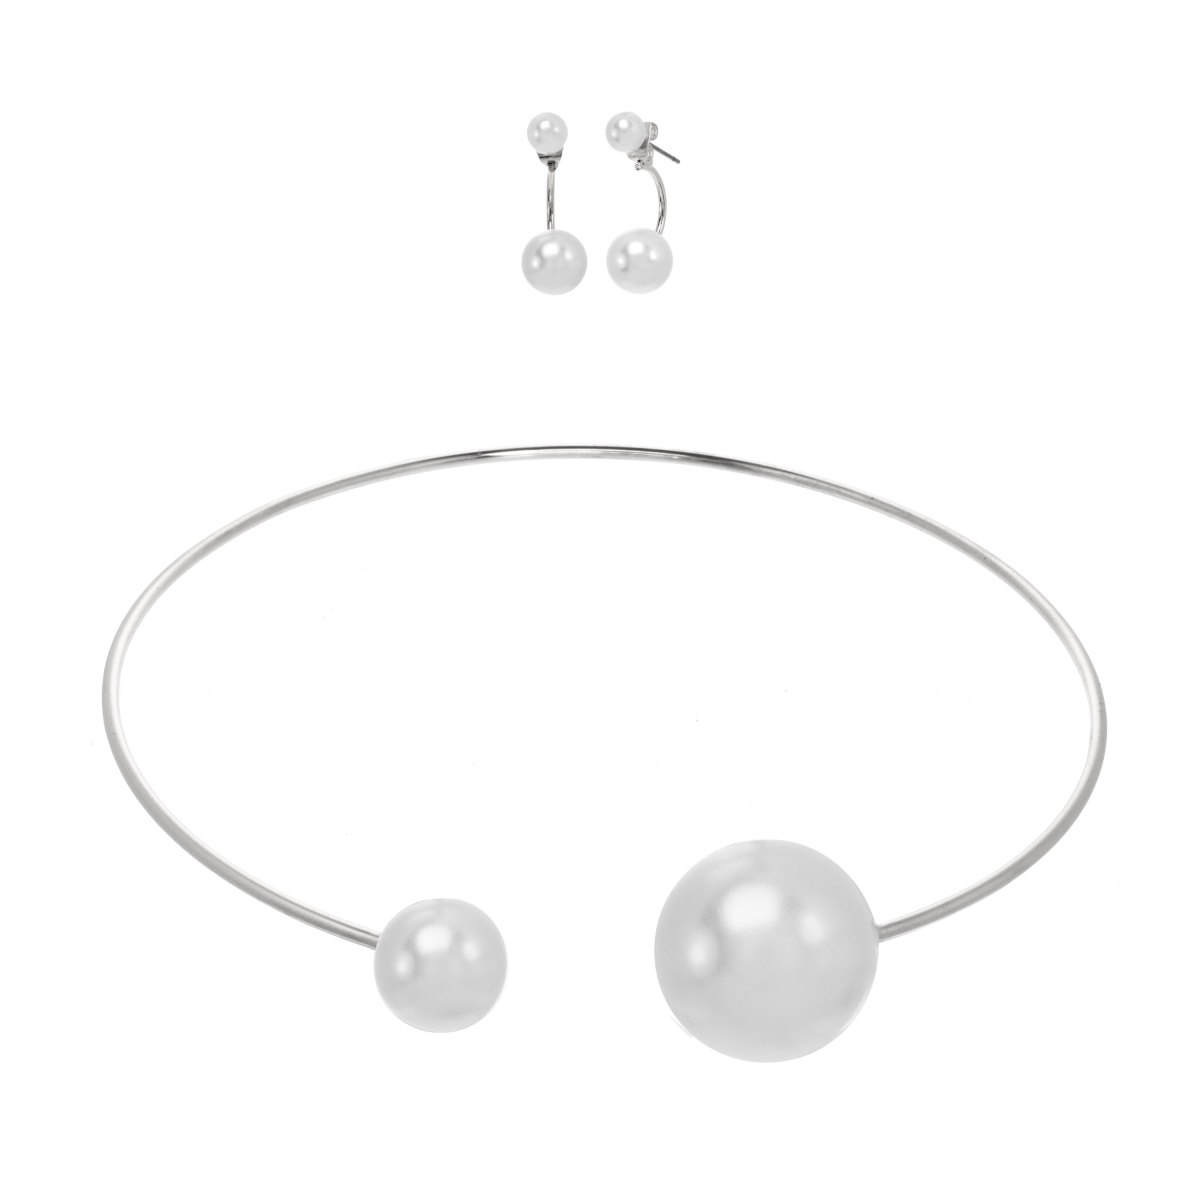 Picture of J&H Designs 9134 SET Silver Pearl Front-back Stud Drop Earrings and Necklace Jewelry Set